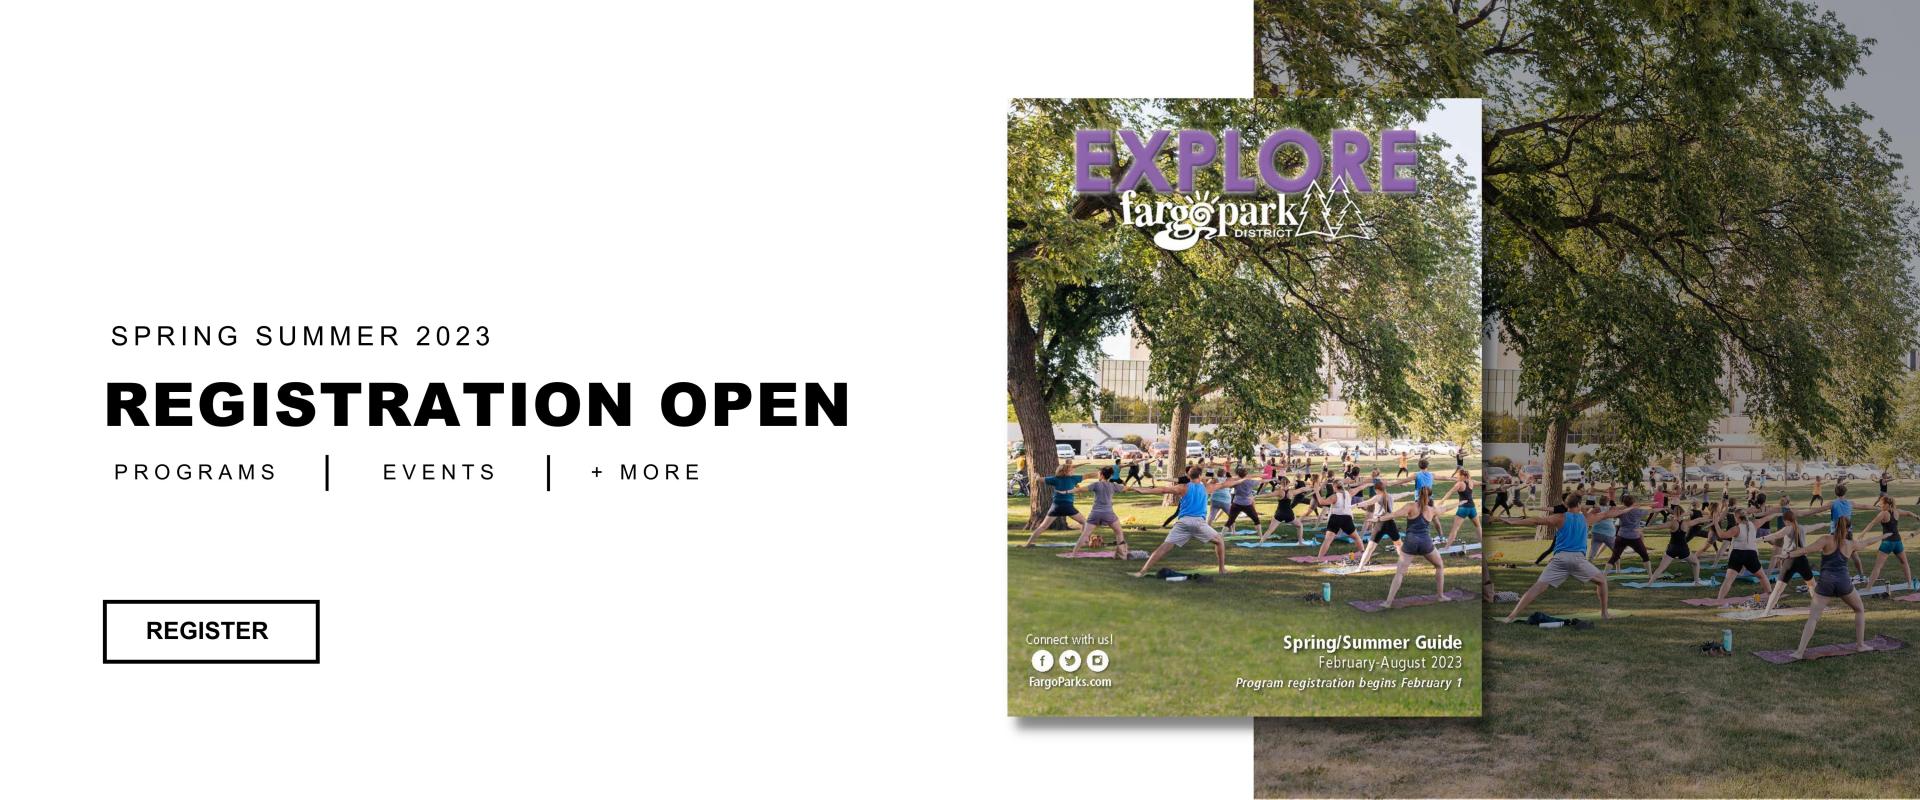 White background with Spring Summer 2023 REGISTRATION OPEN Programs | Events | + More with Register button on left side of image, right side is image of the cover of the Fargo Park District activity guide for spring/summer 2023 with a image of adults doing yoga in Island Park